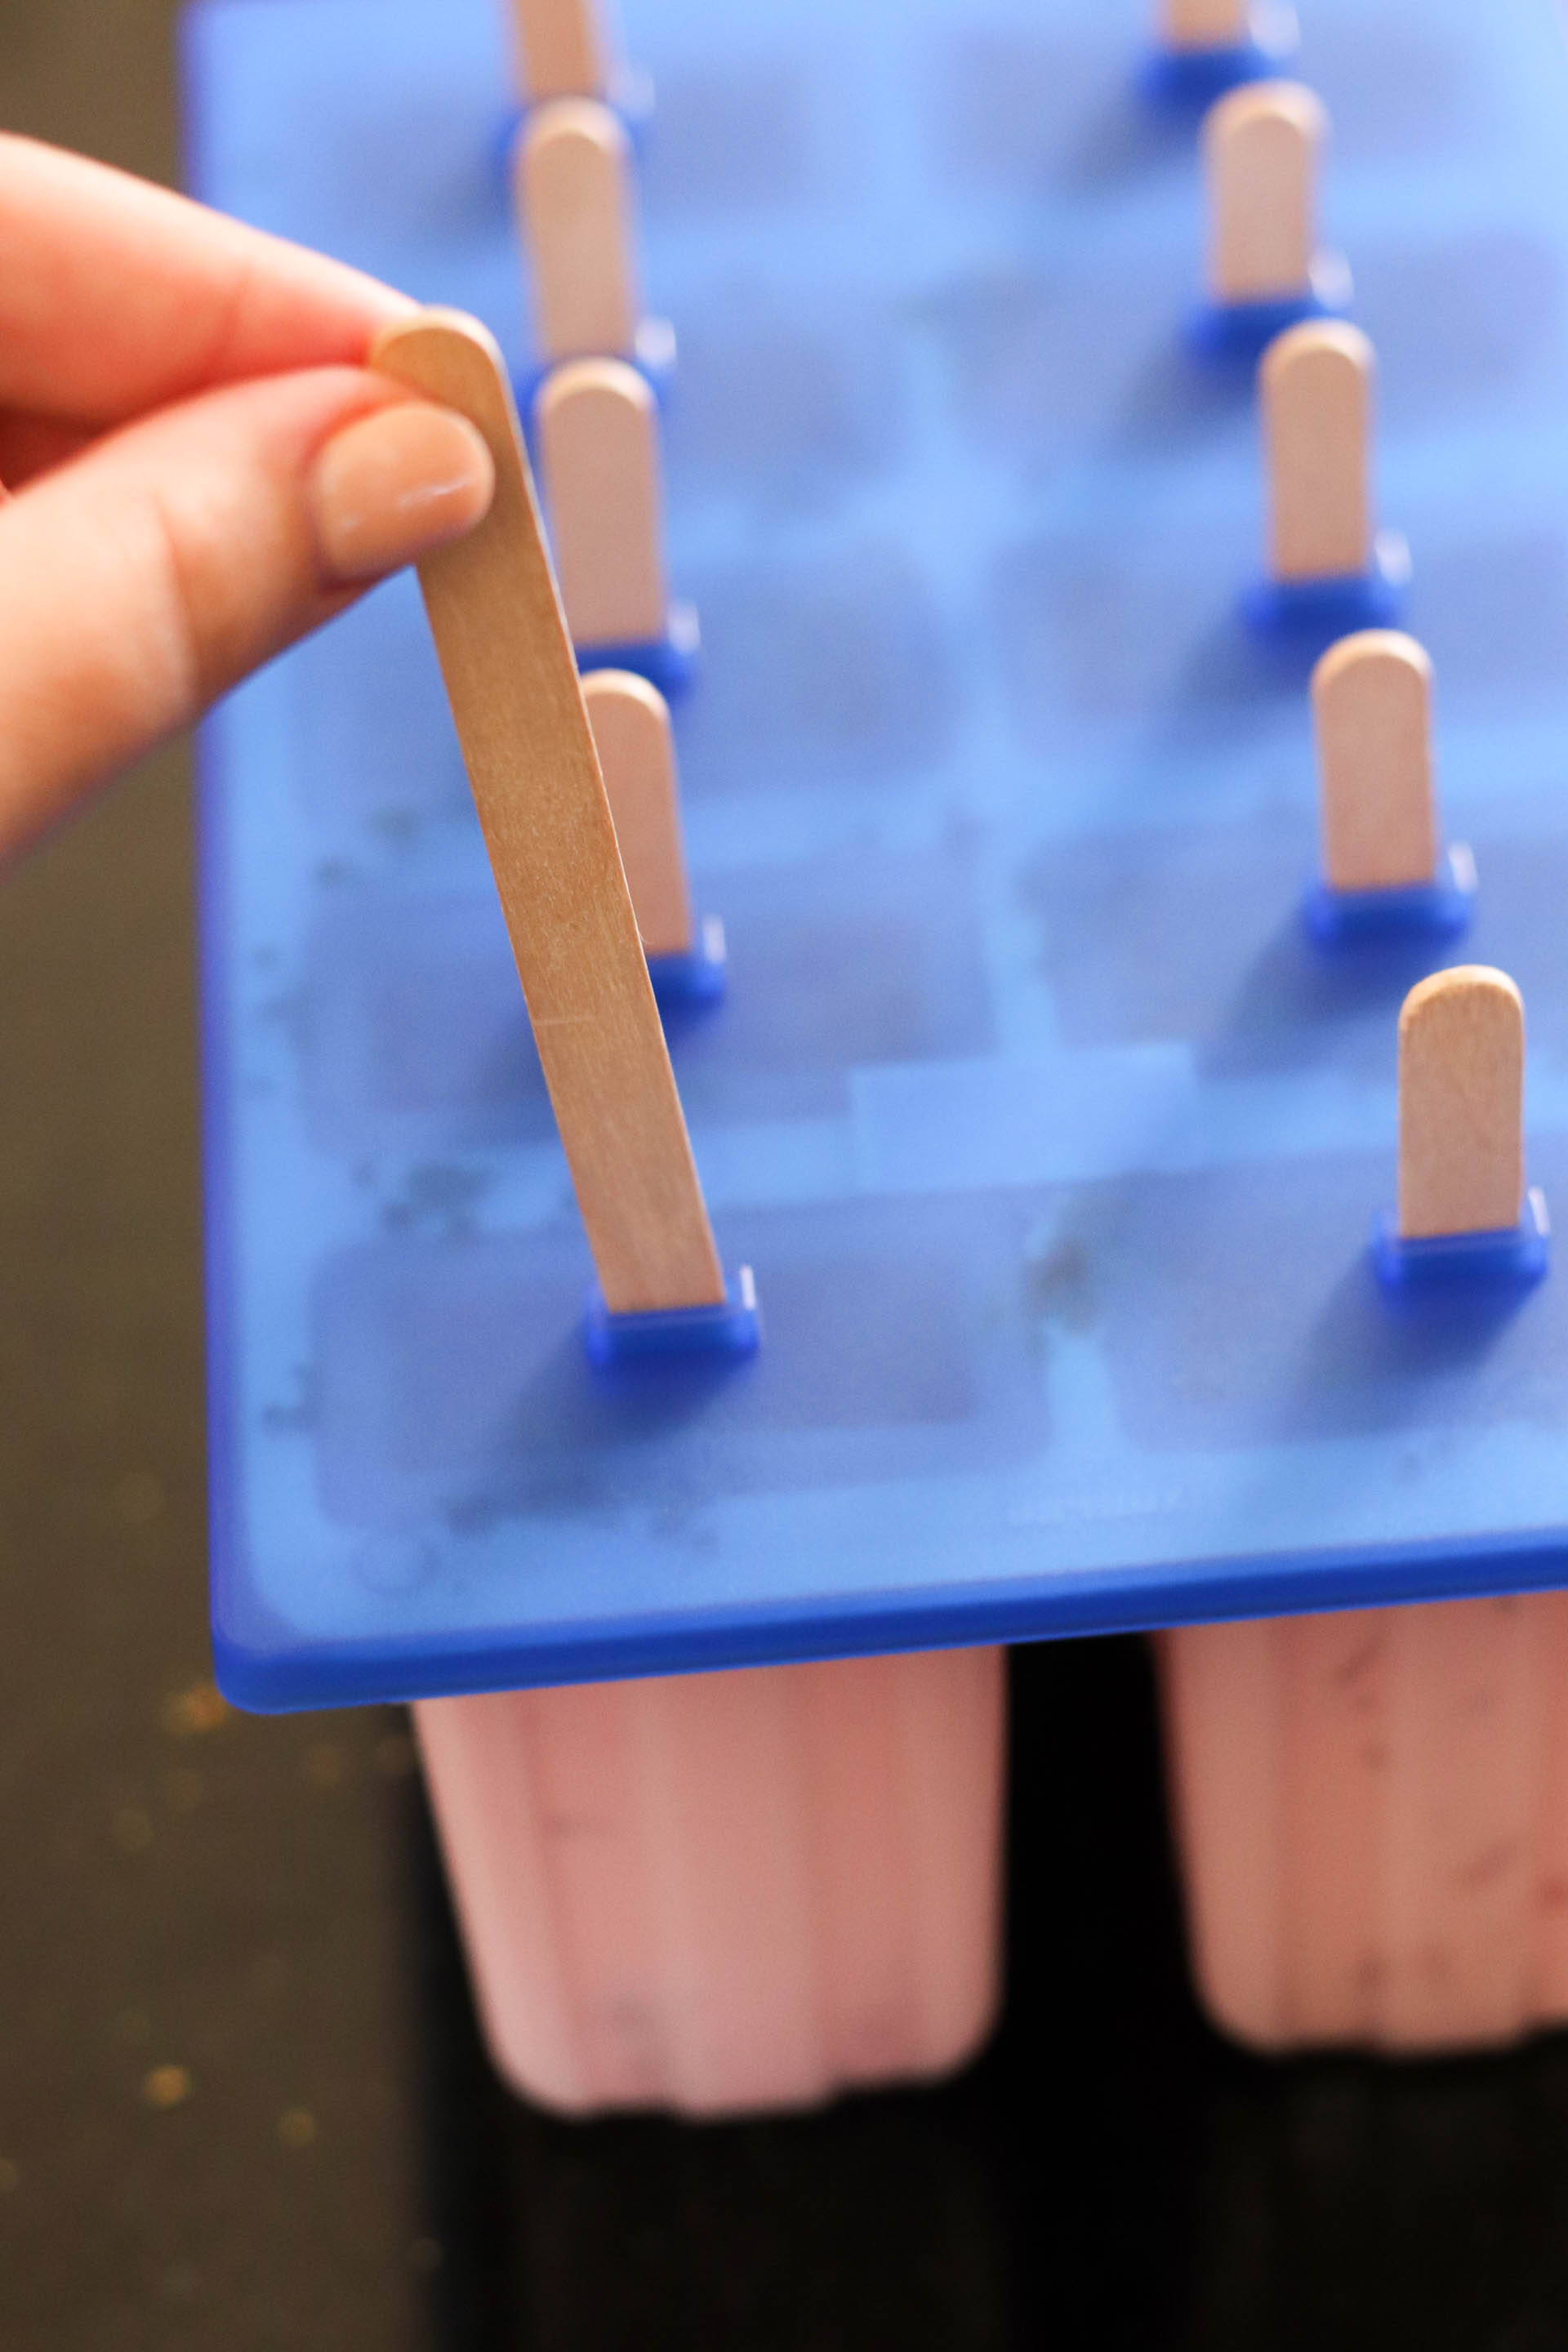 Placing popsicle sticks into the popsicle mold